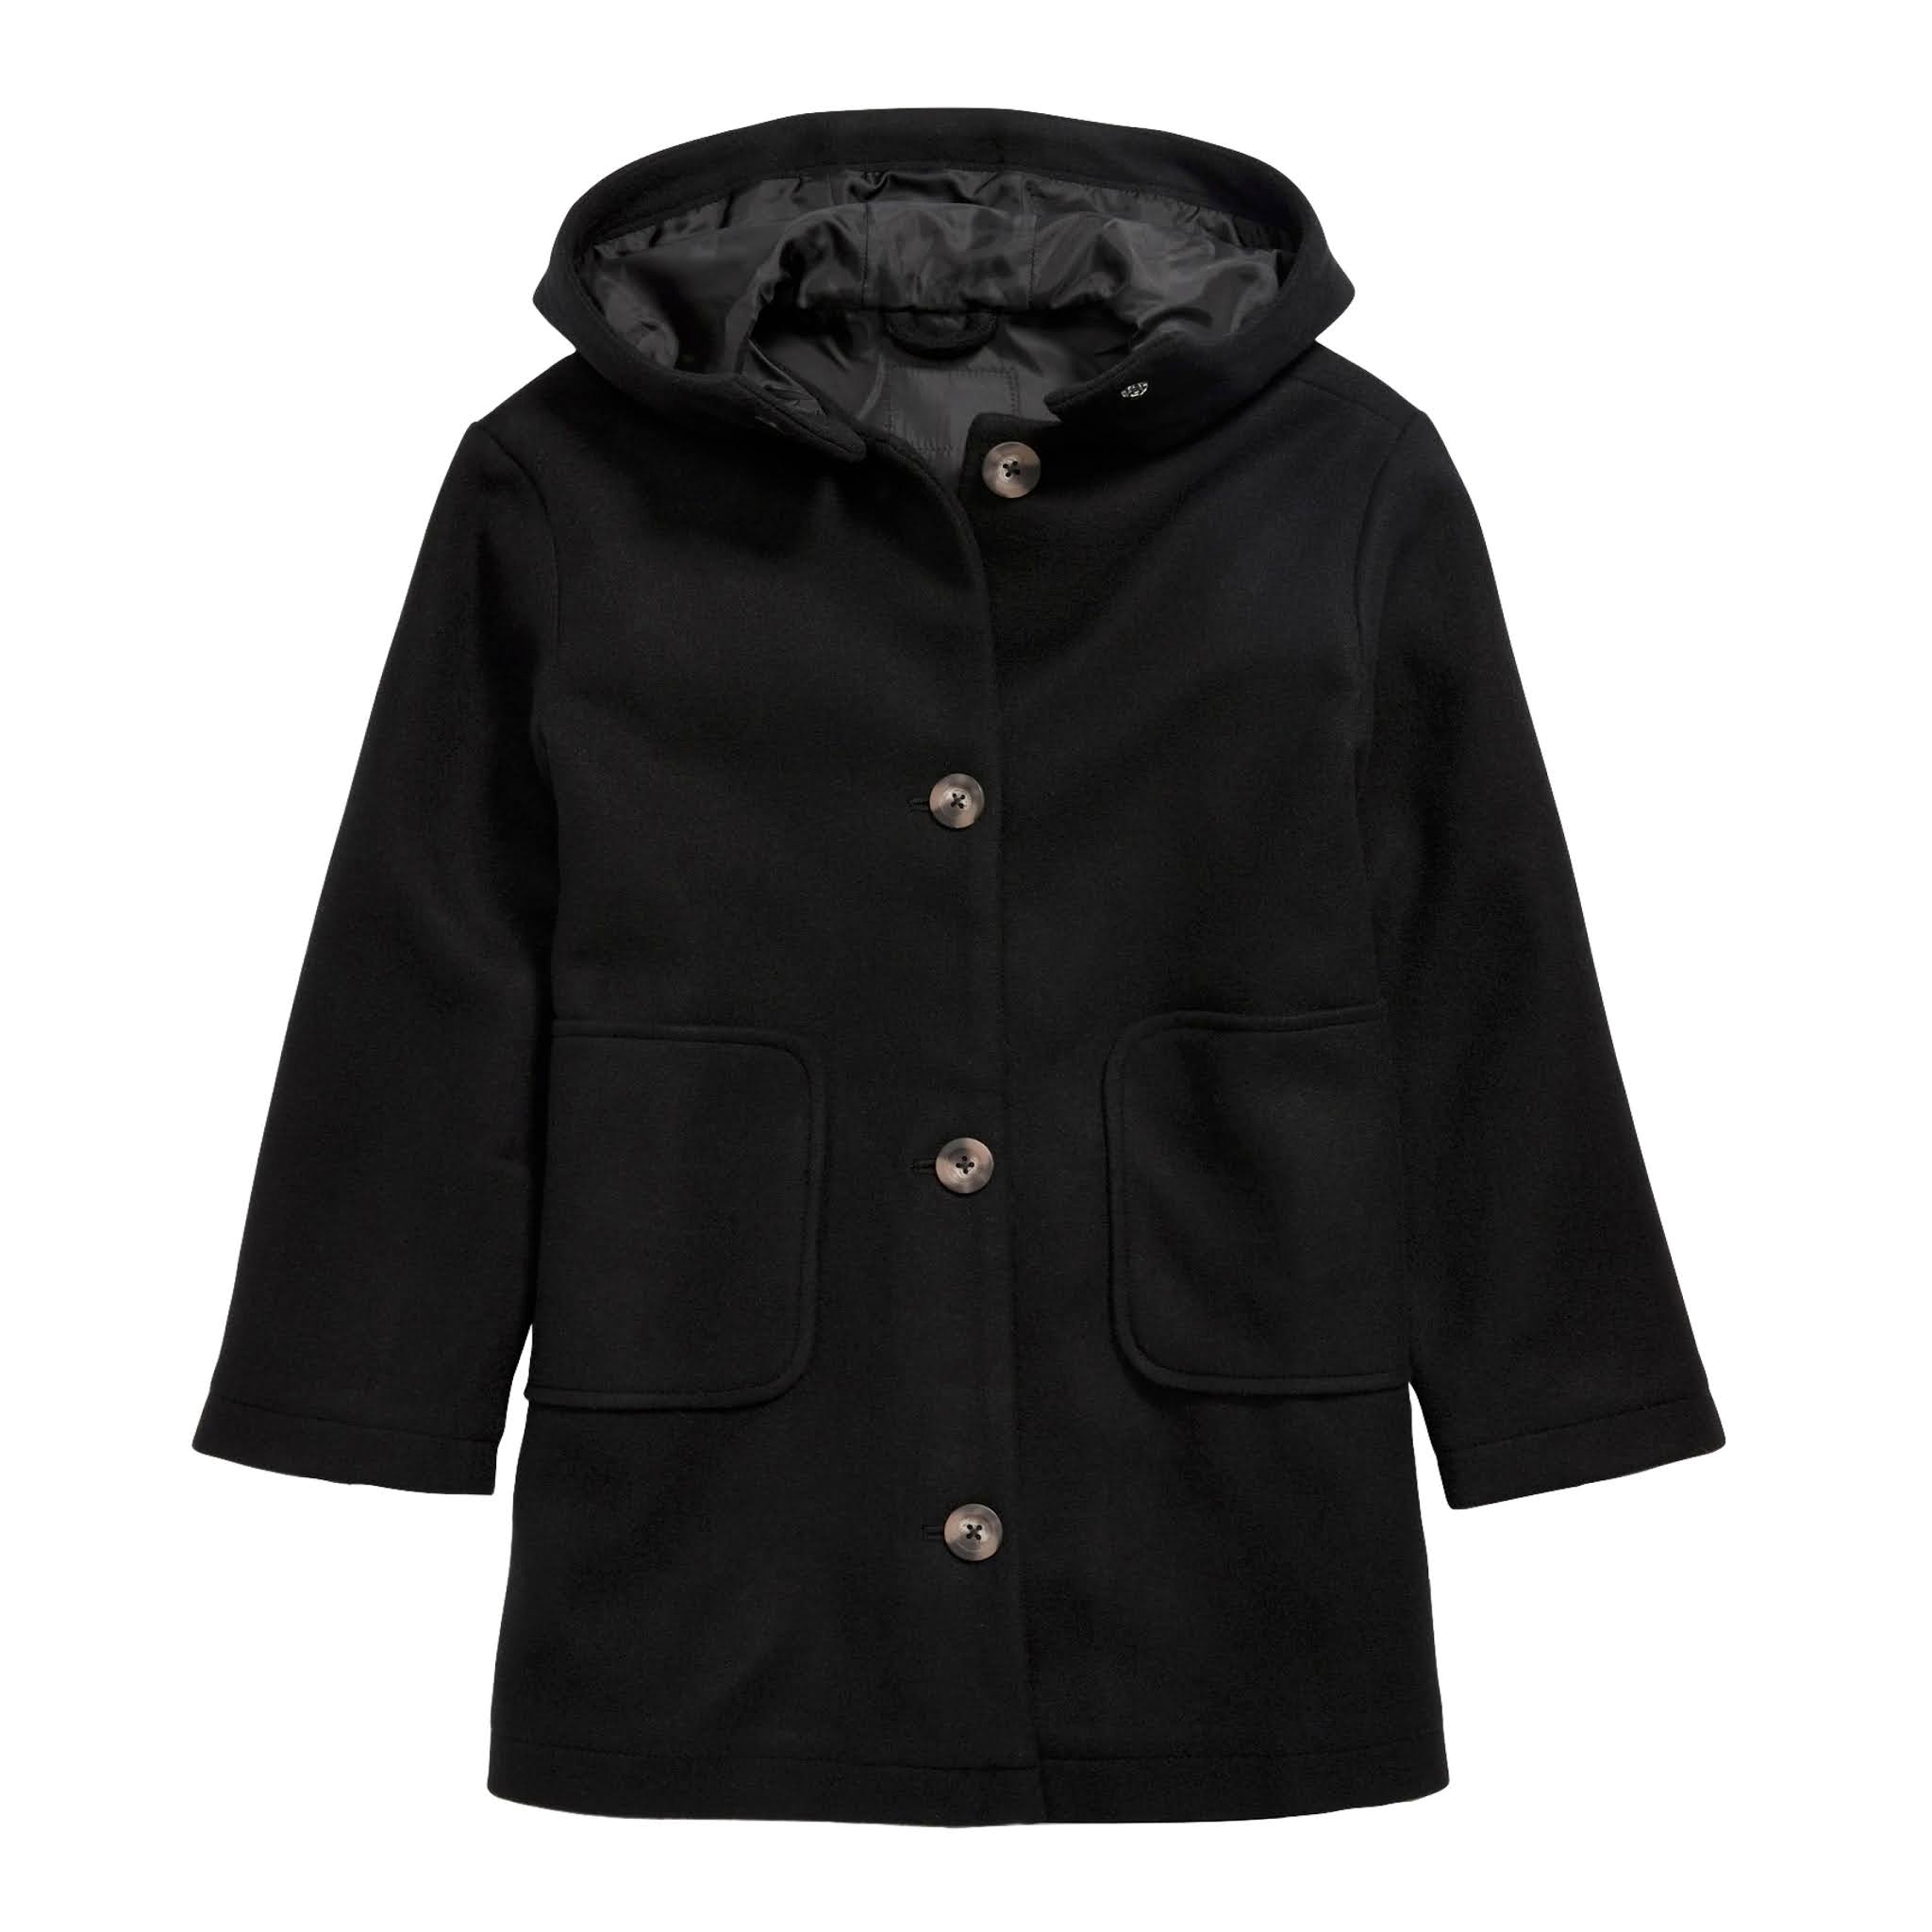 Girls Hooded Soft-Brushed Coat from Old Navy